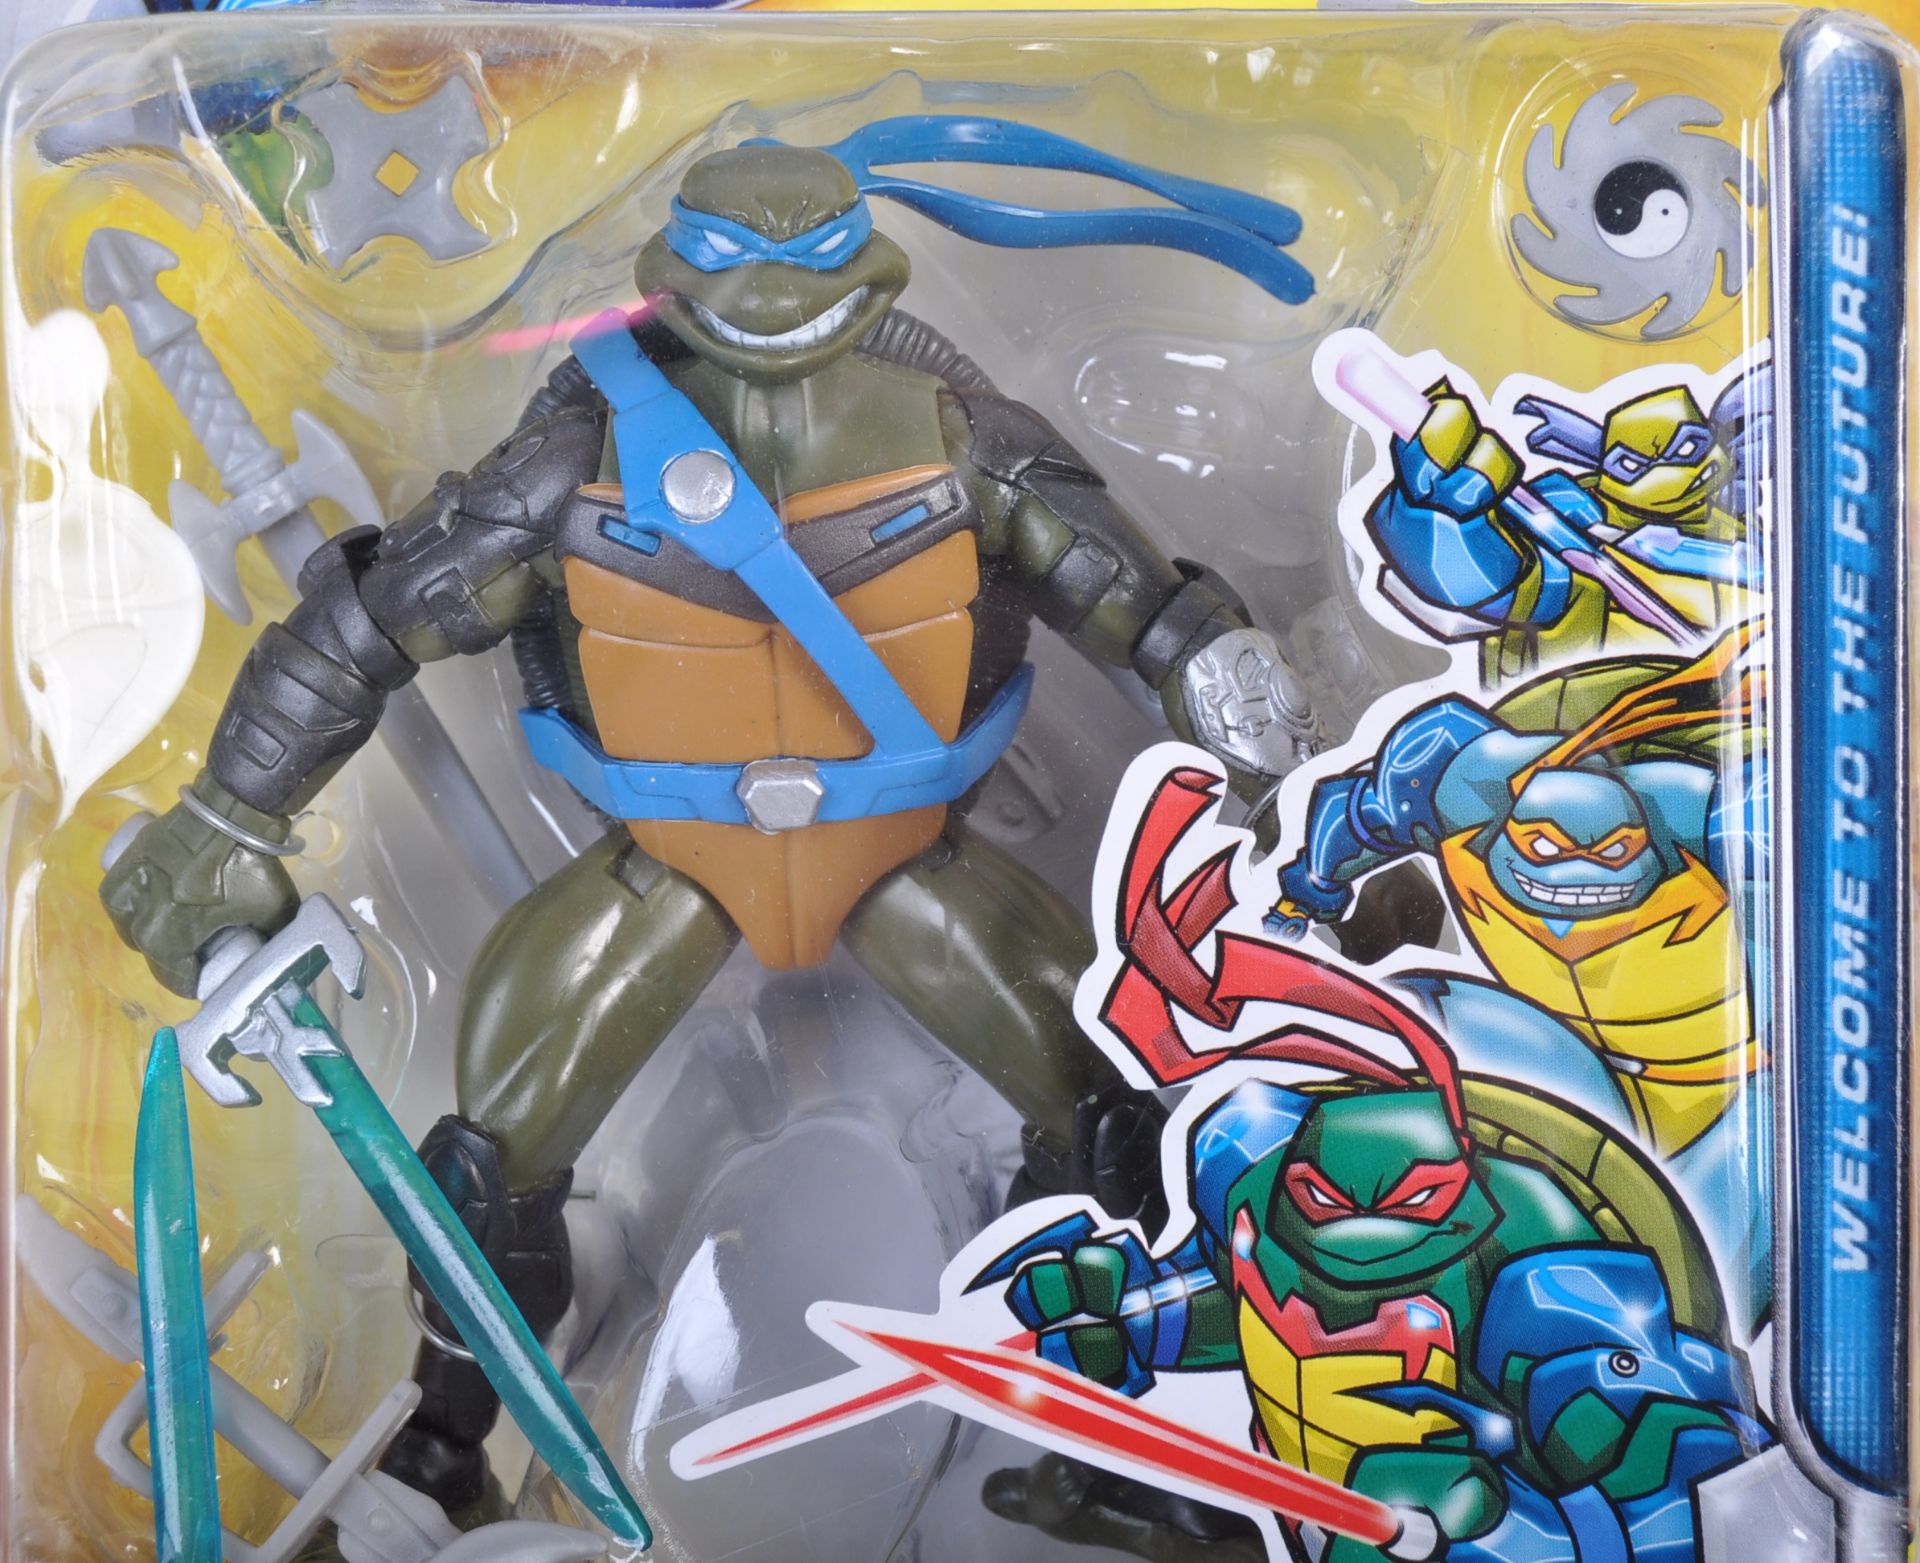 PLAYMATES FACTORY SEALED TMNT COWABUNGA CARL PARTY BUS - Image 8 of 9